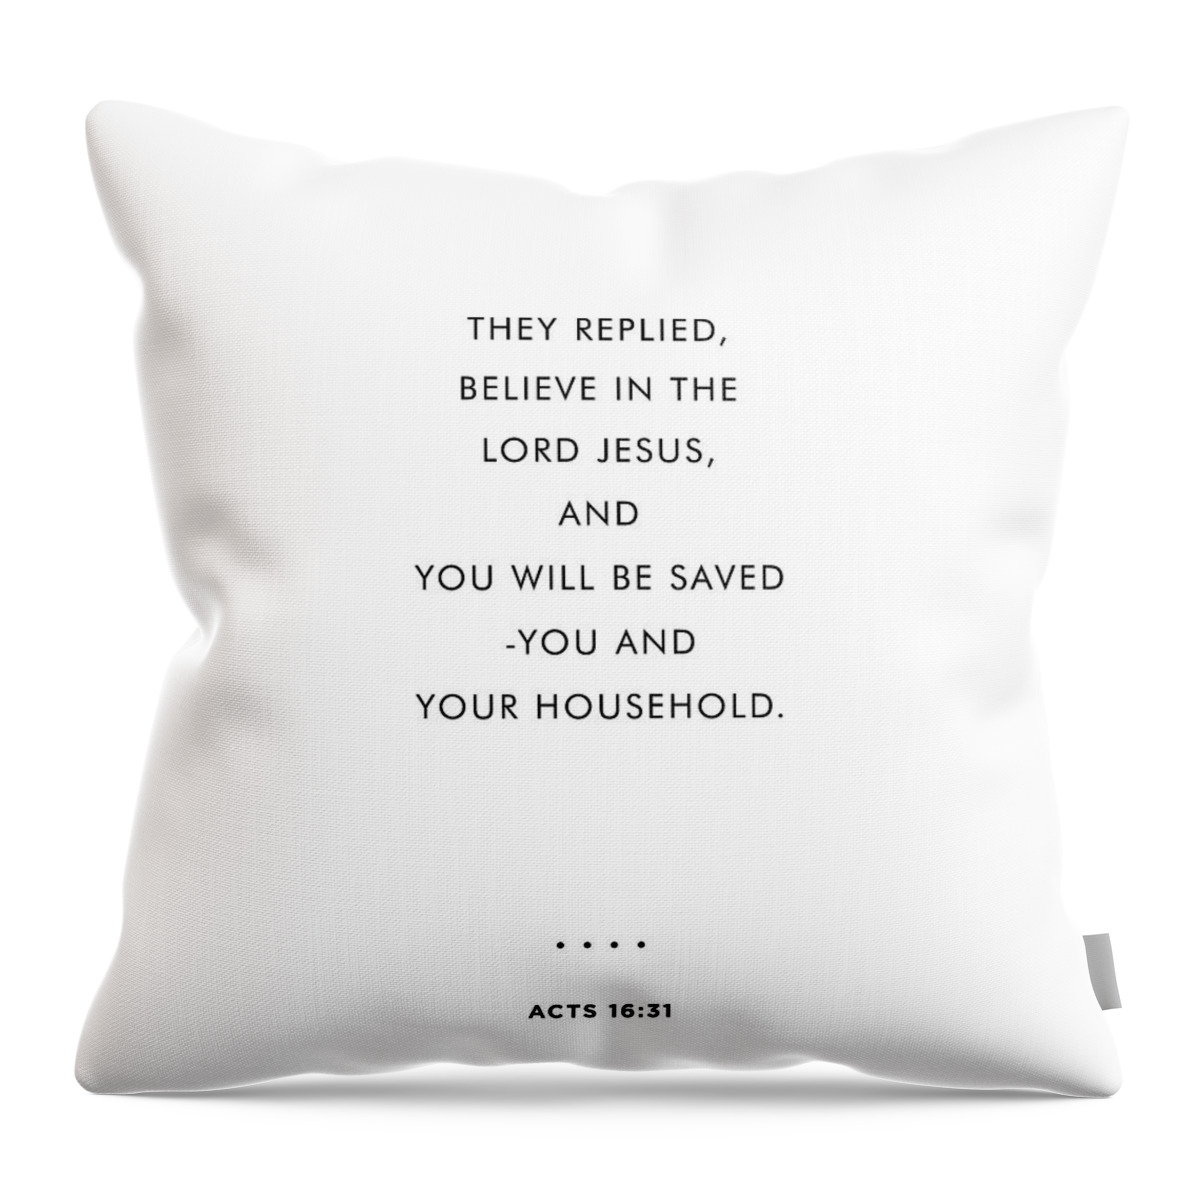 Acts 16 31 Throw Pillow featuring the mixed media Acts 16 31 - Minimal Bible Verses 2 - Christian - Bible Quote Poster - Scripture, Spiritual - Belief by Studio Grafiikka